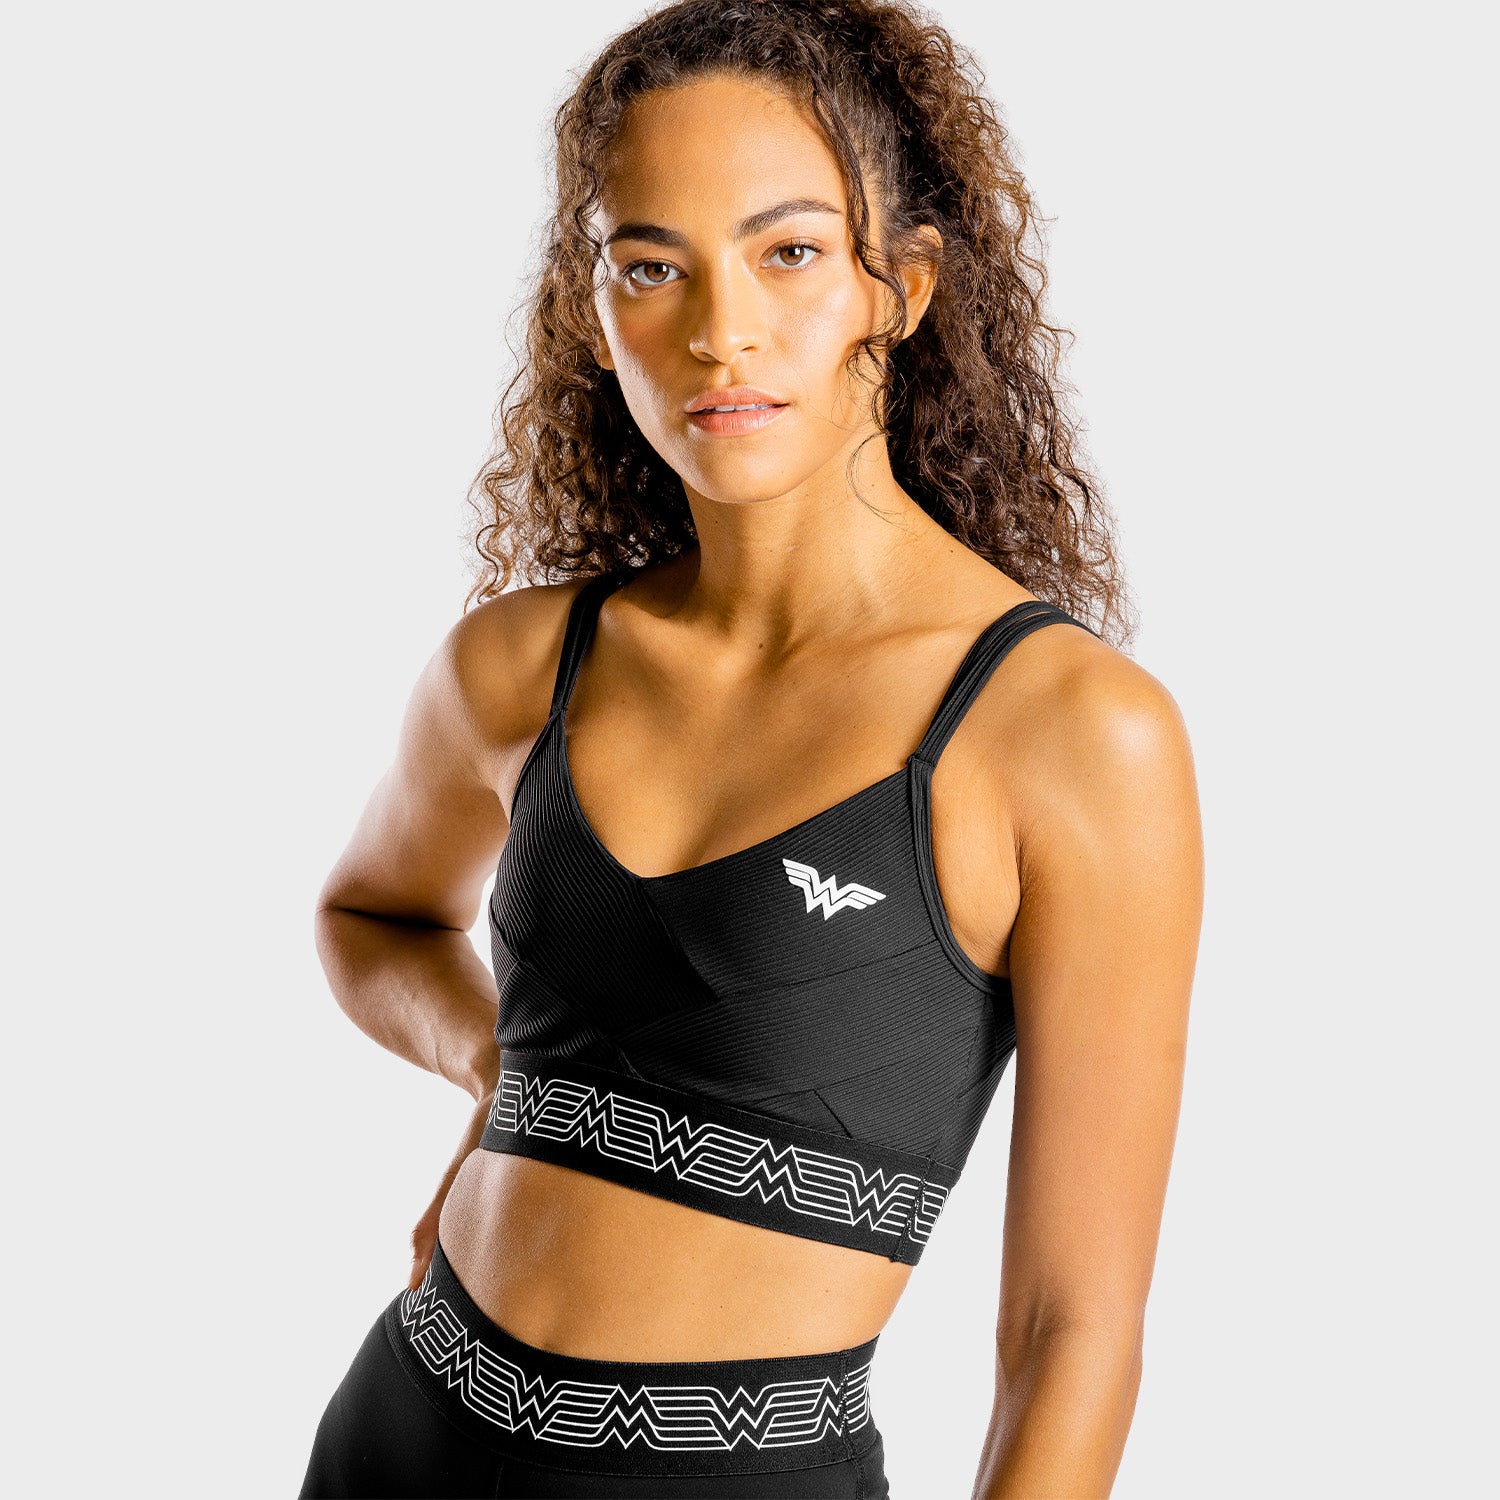 Under Armour Women's ® Alter Ego Wonder Woman Strappy Low Sports